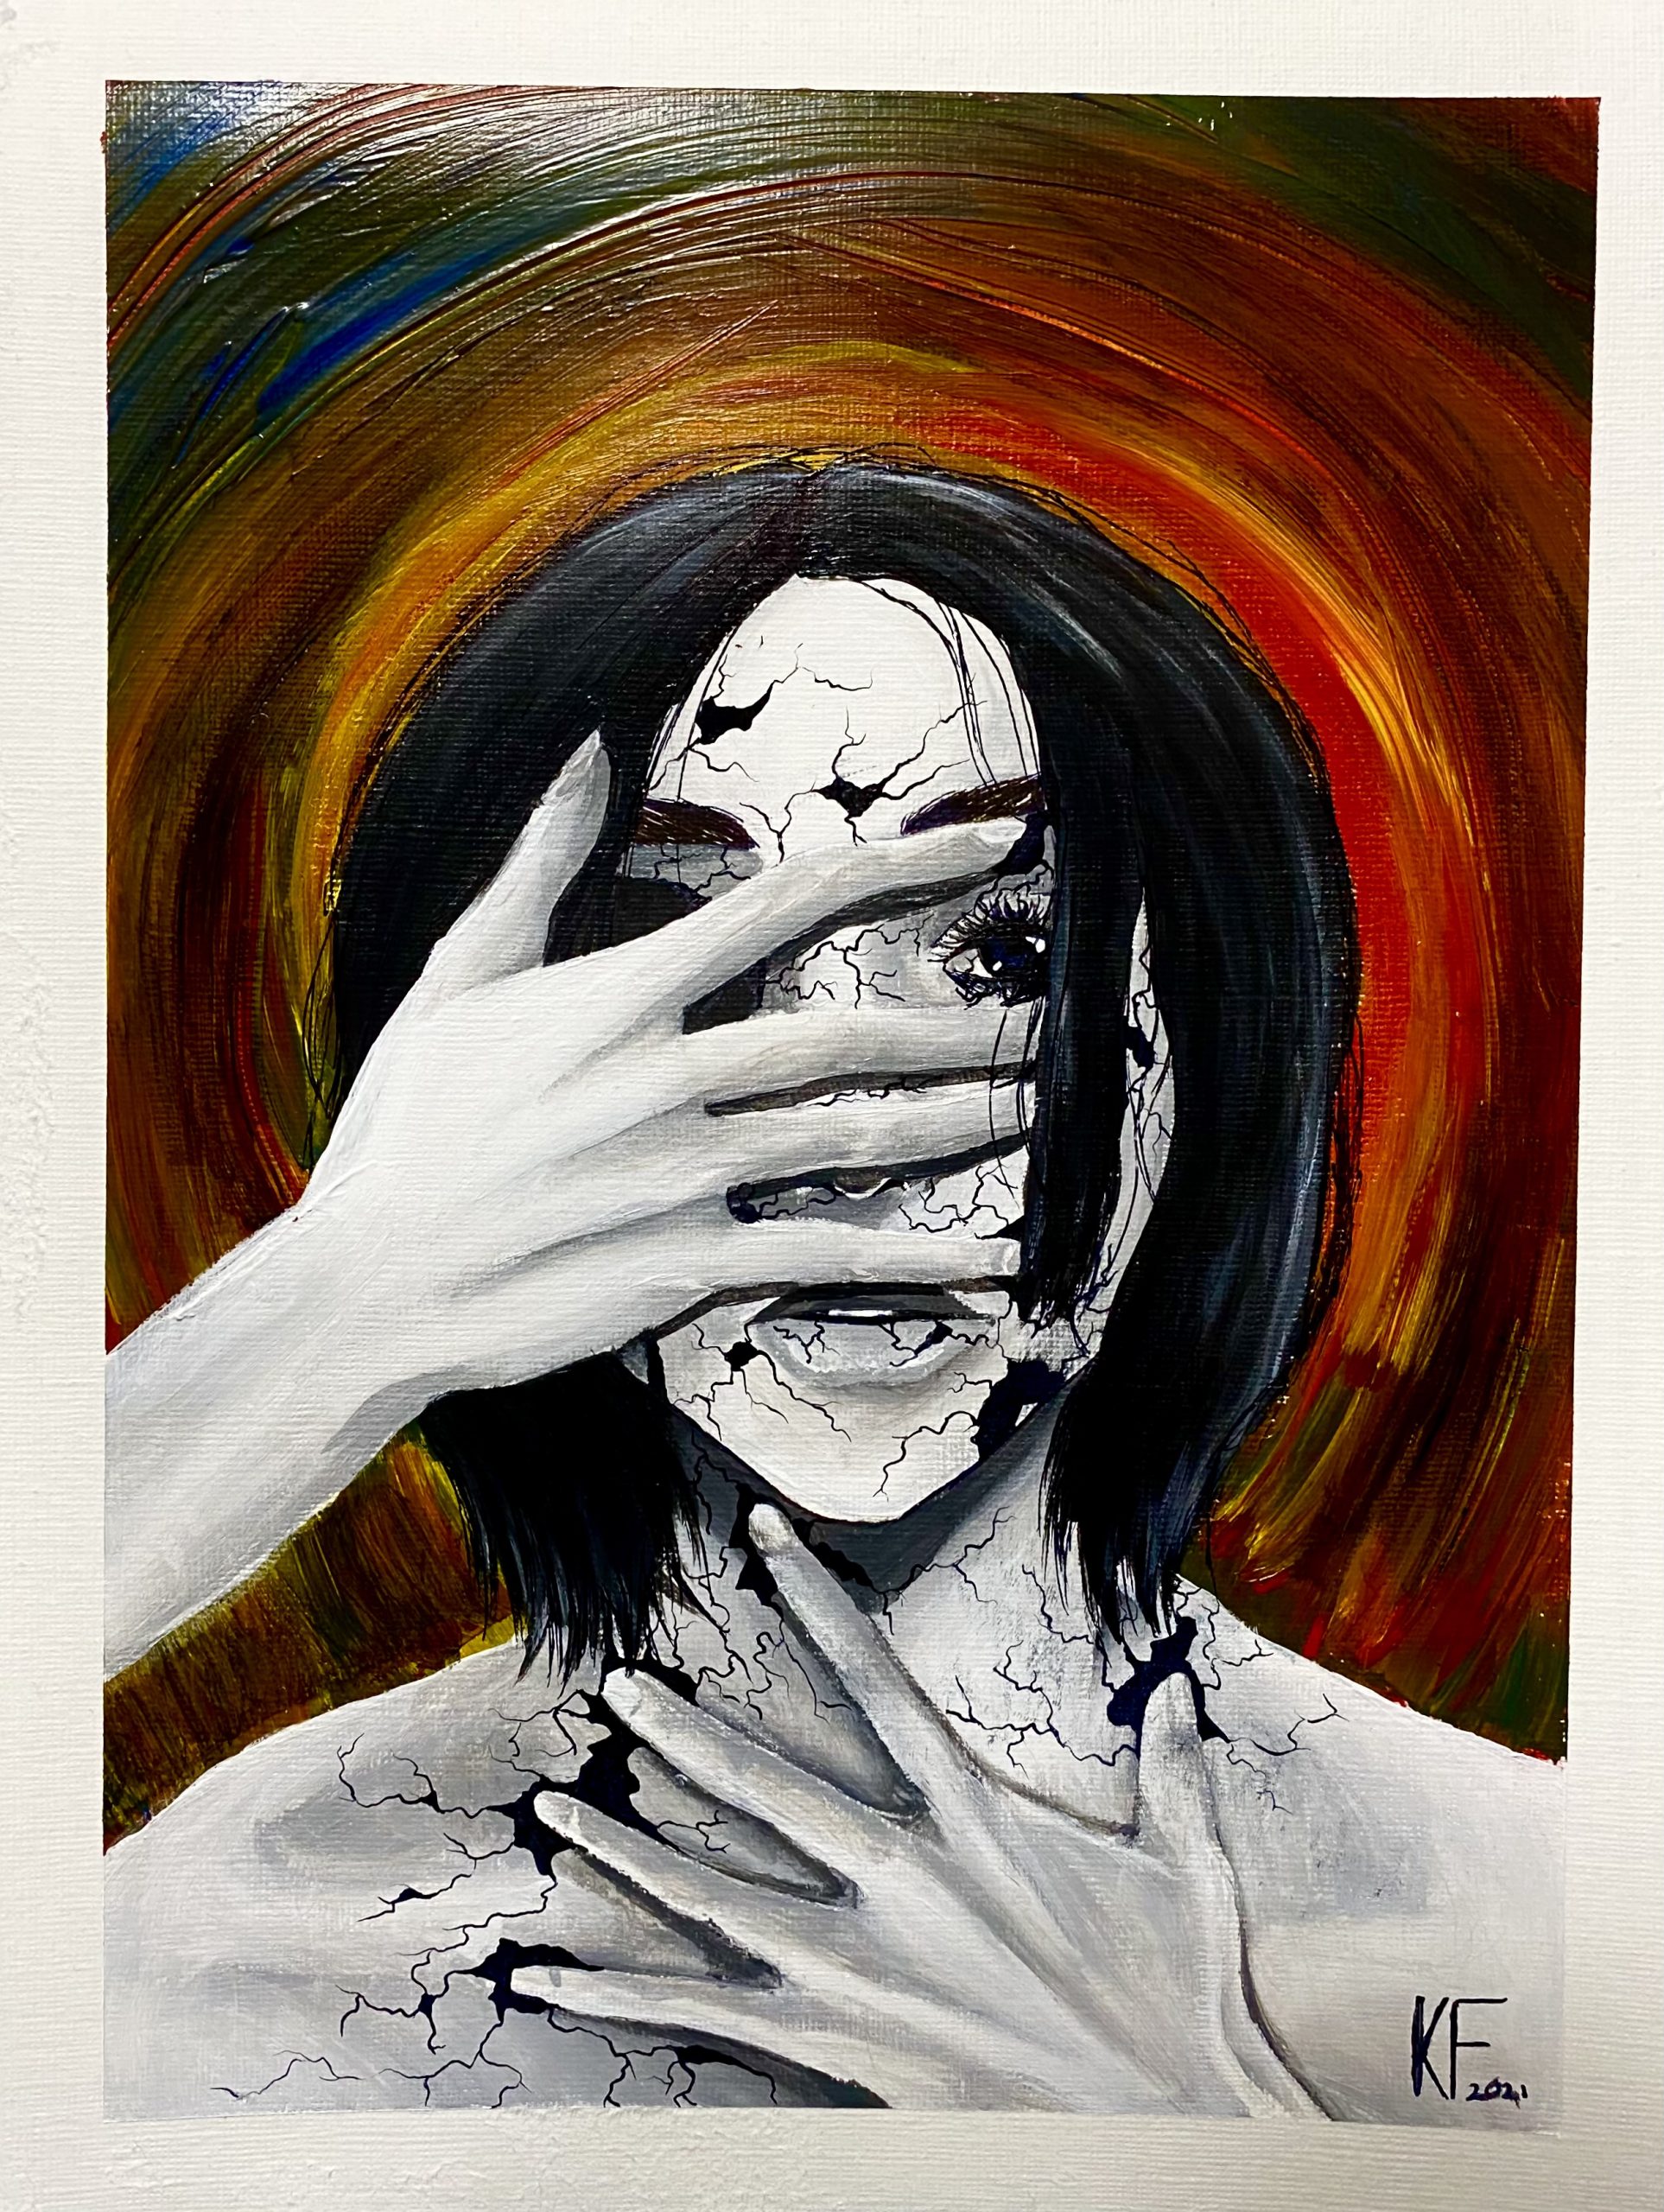 Portrait of a person with shattered porcelain skin and one hand covering their face and the other covering their chest in a protective gesture